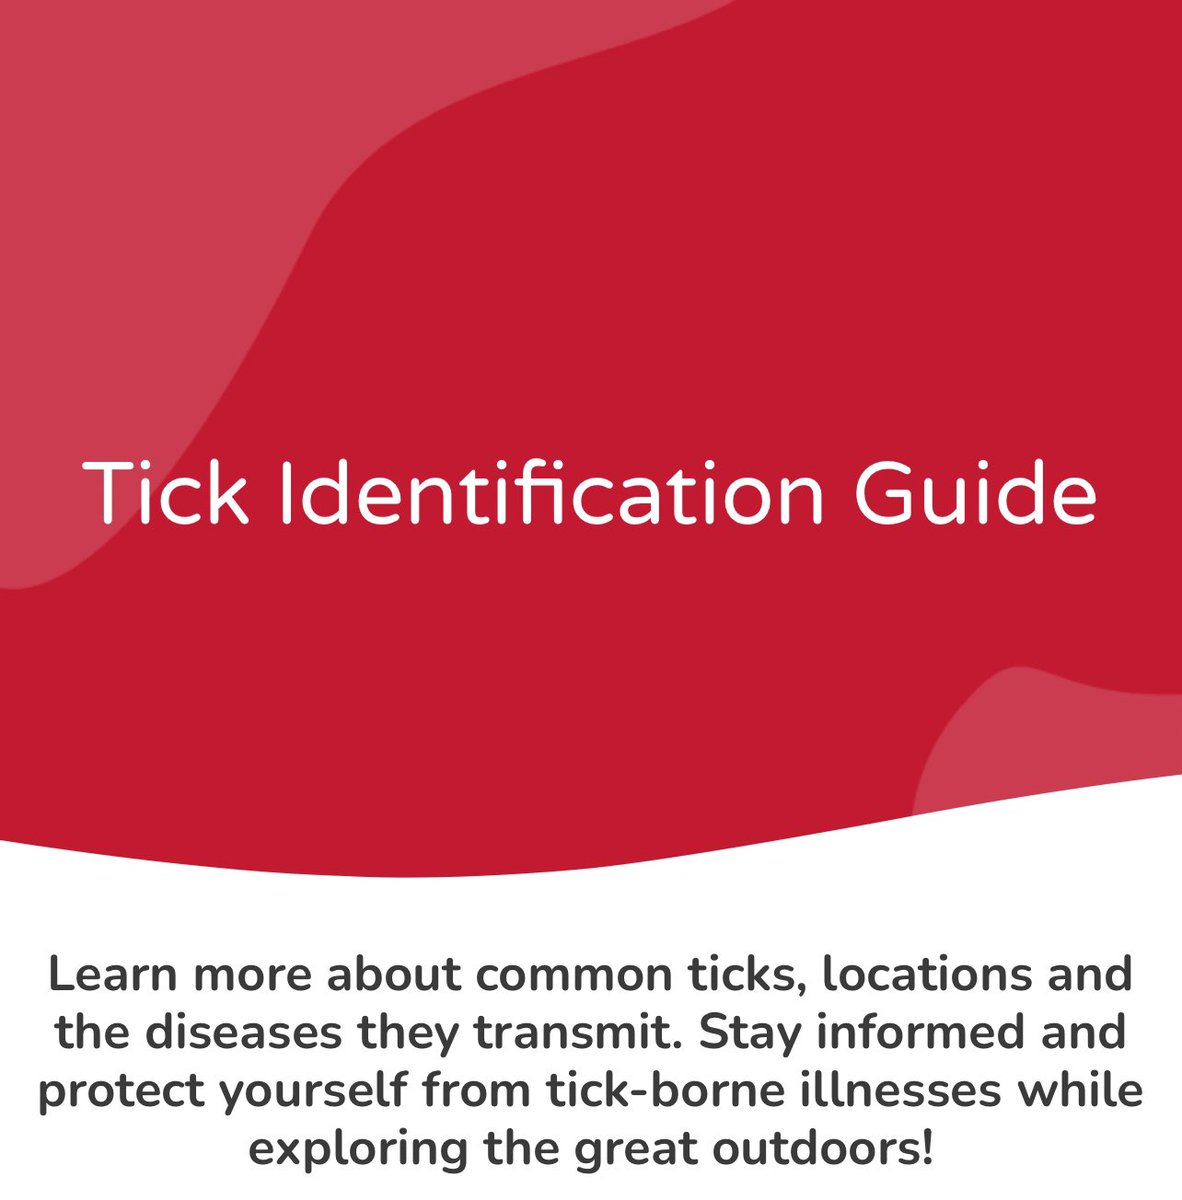 Learn more about which ticks are out there! Tick Identification Guide: ticktweezers.com/tick-identific… 

#ticks #lyme #publichealth #environmental #vector #health @IpmTick @TickAppOnTour @TickReport